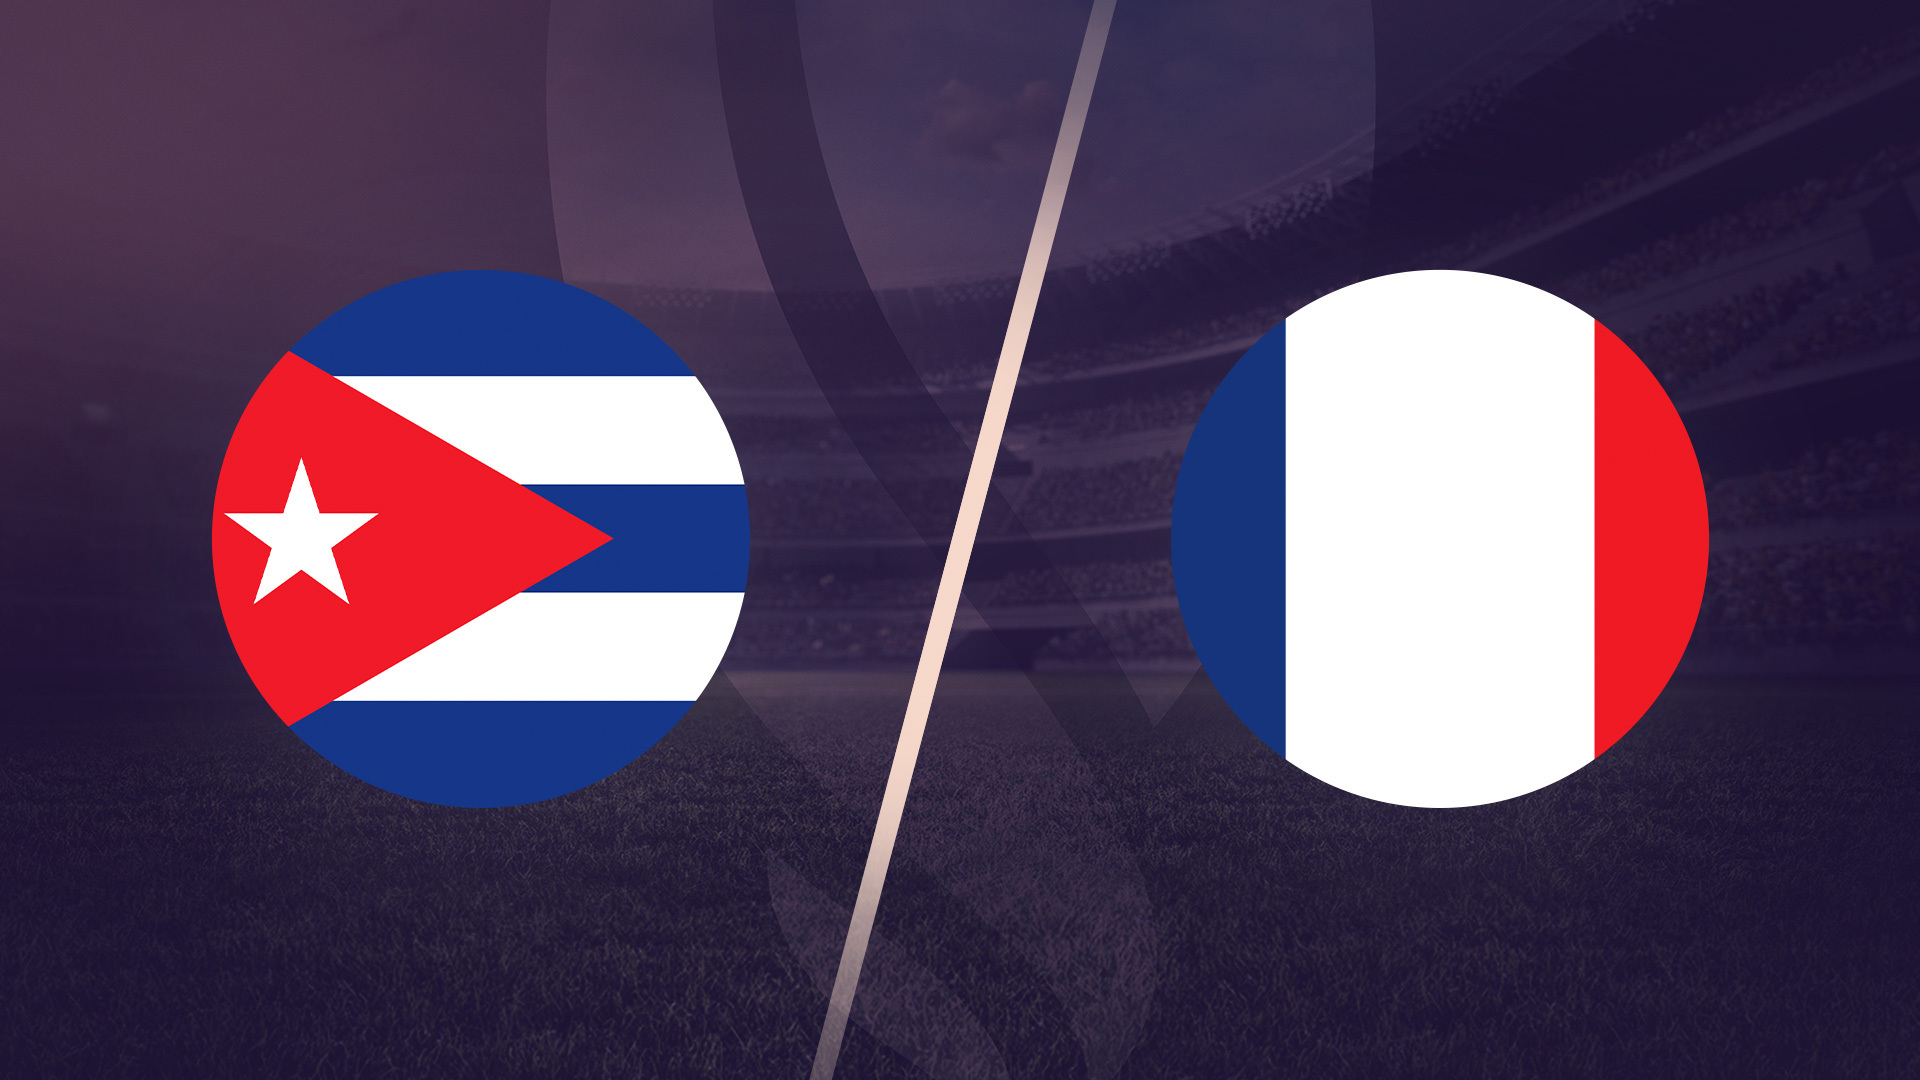 Cuba 3-0 Guadalupe  Road to W Gold Cup 